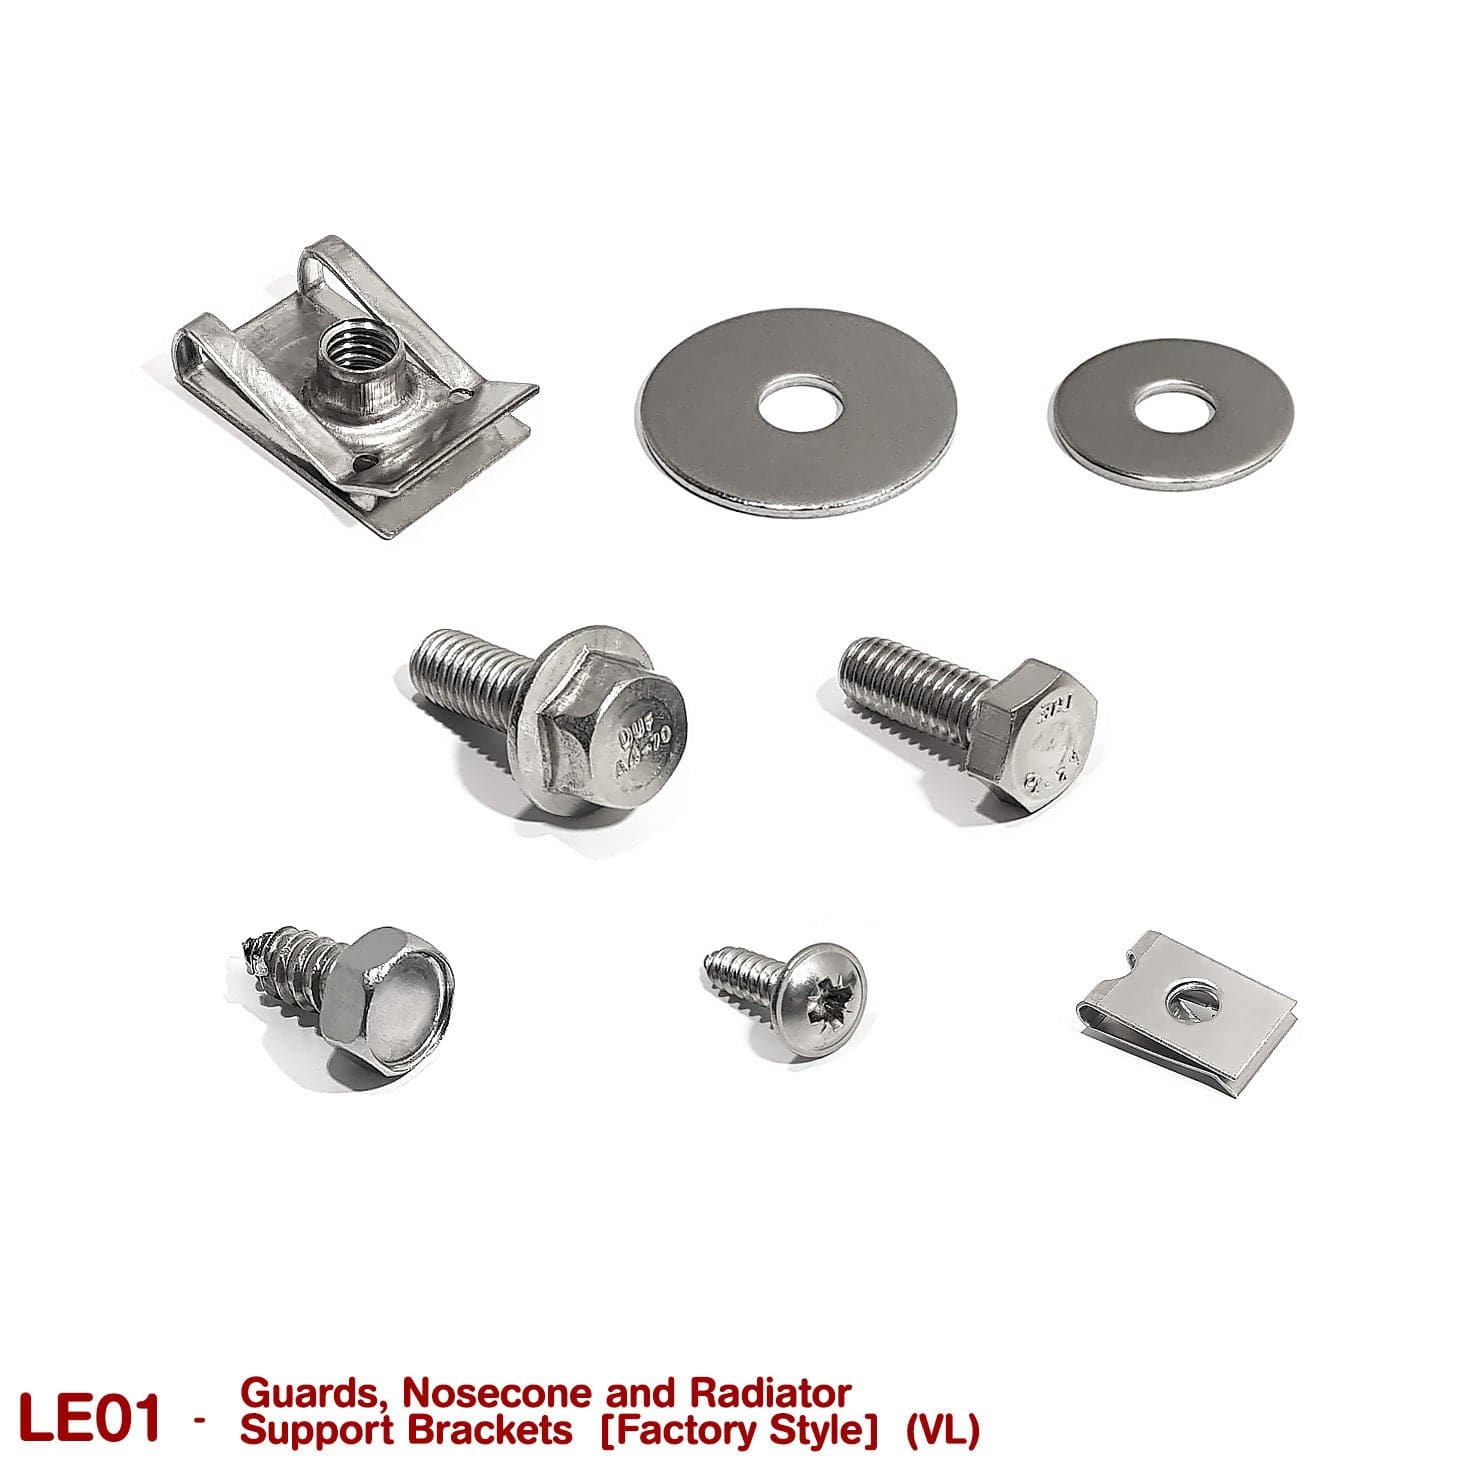 GUARDS and NOSE CONE FASTENER KIT for VL